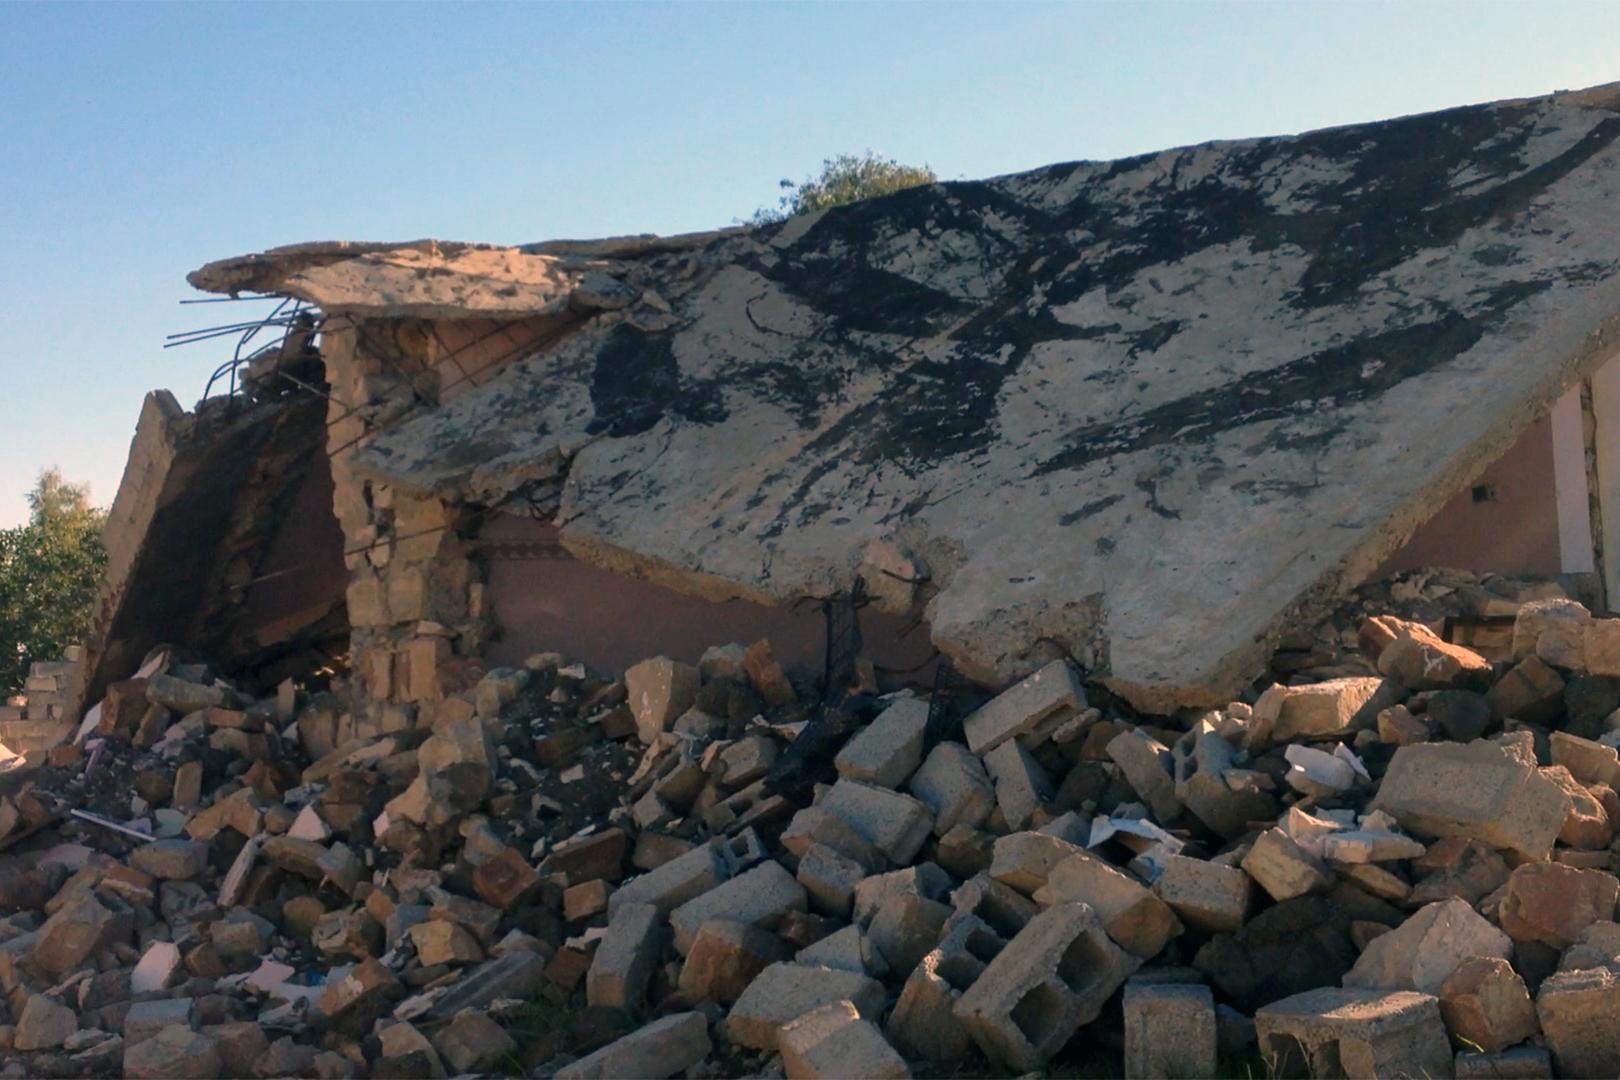 Houses destroyed by bulldozers in Idris Khaz’al after February 1, 2015. 